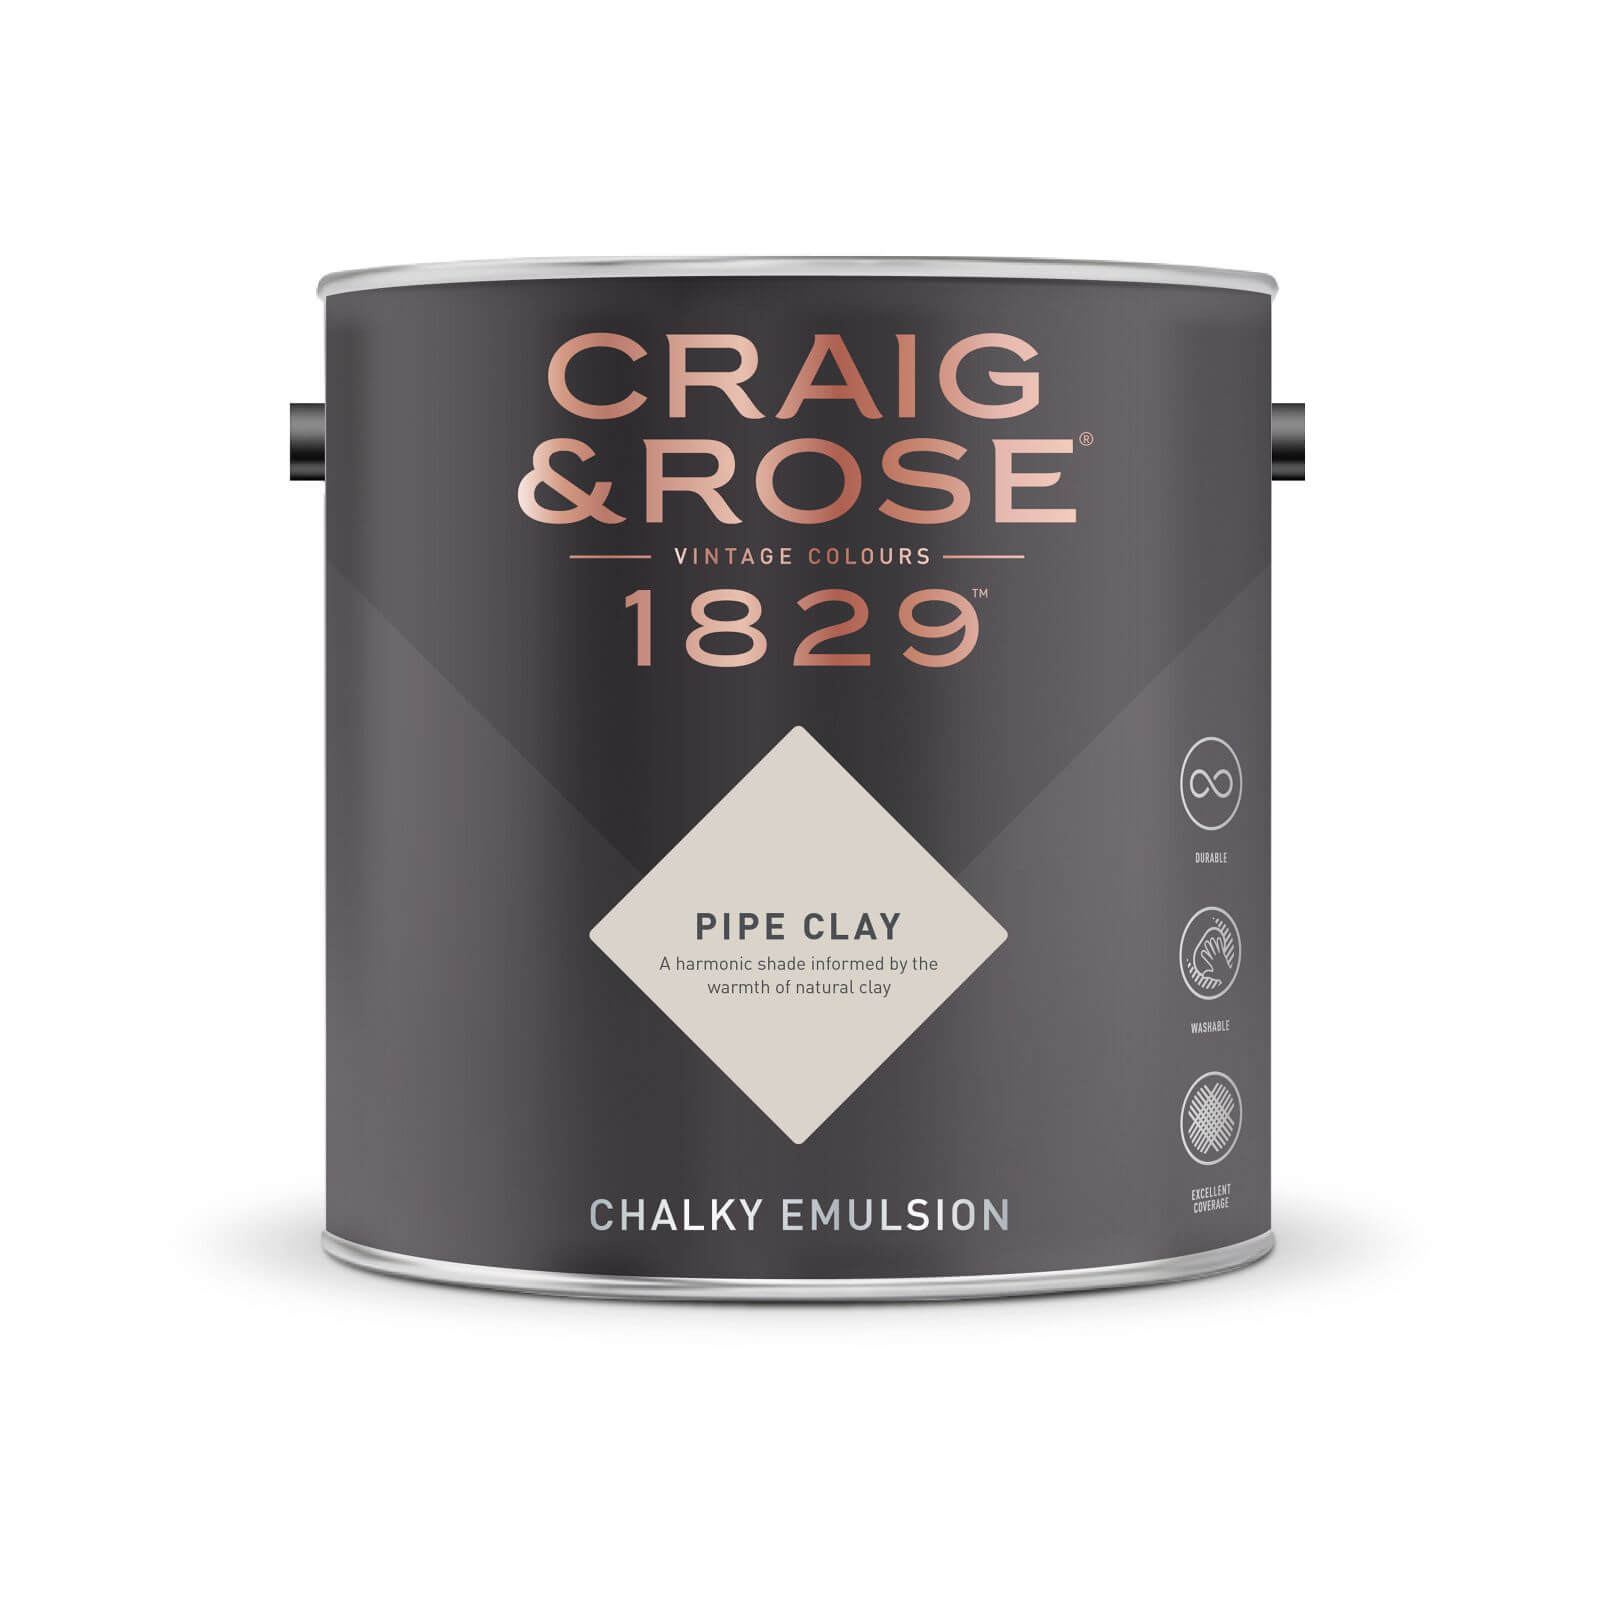 Craig & Rose 1829 Chalky Emulsion Paint Pipe Clay- Tester 50ml